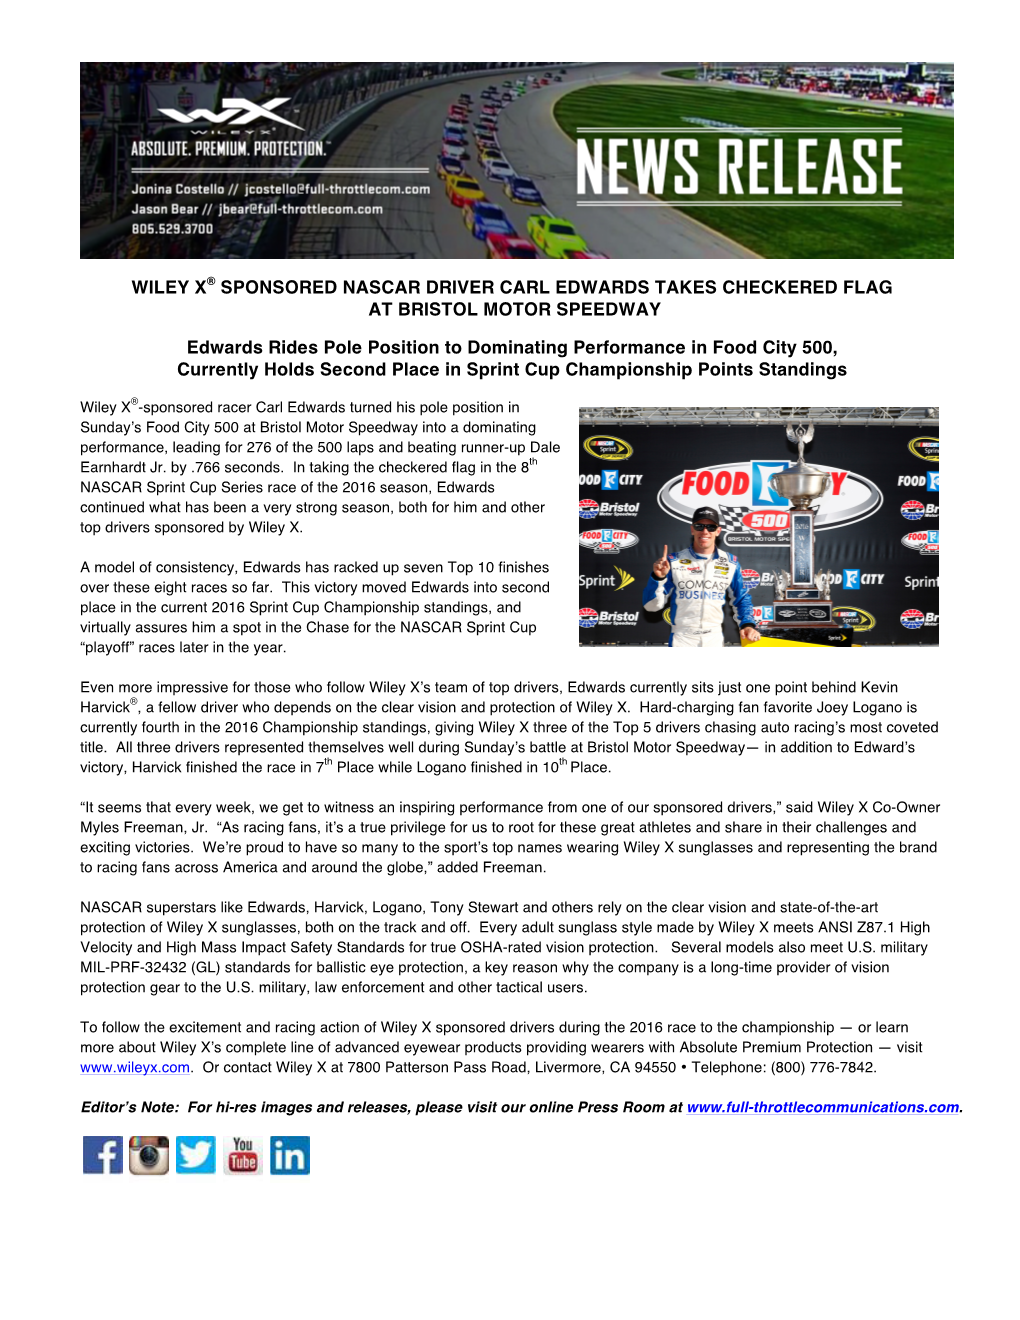 Wiley X® Sponsored Nascar Driver Carl Edwards Takes Checkered Flag at Bristol Motor Speedway